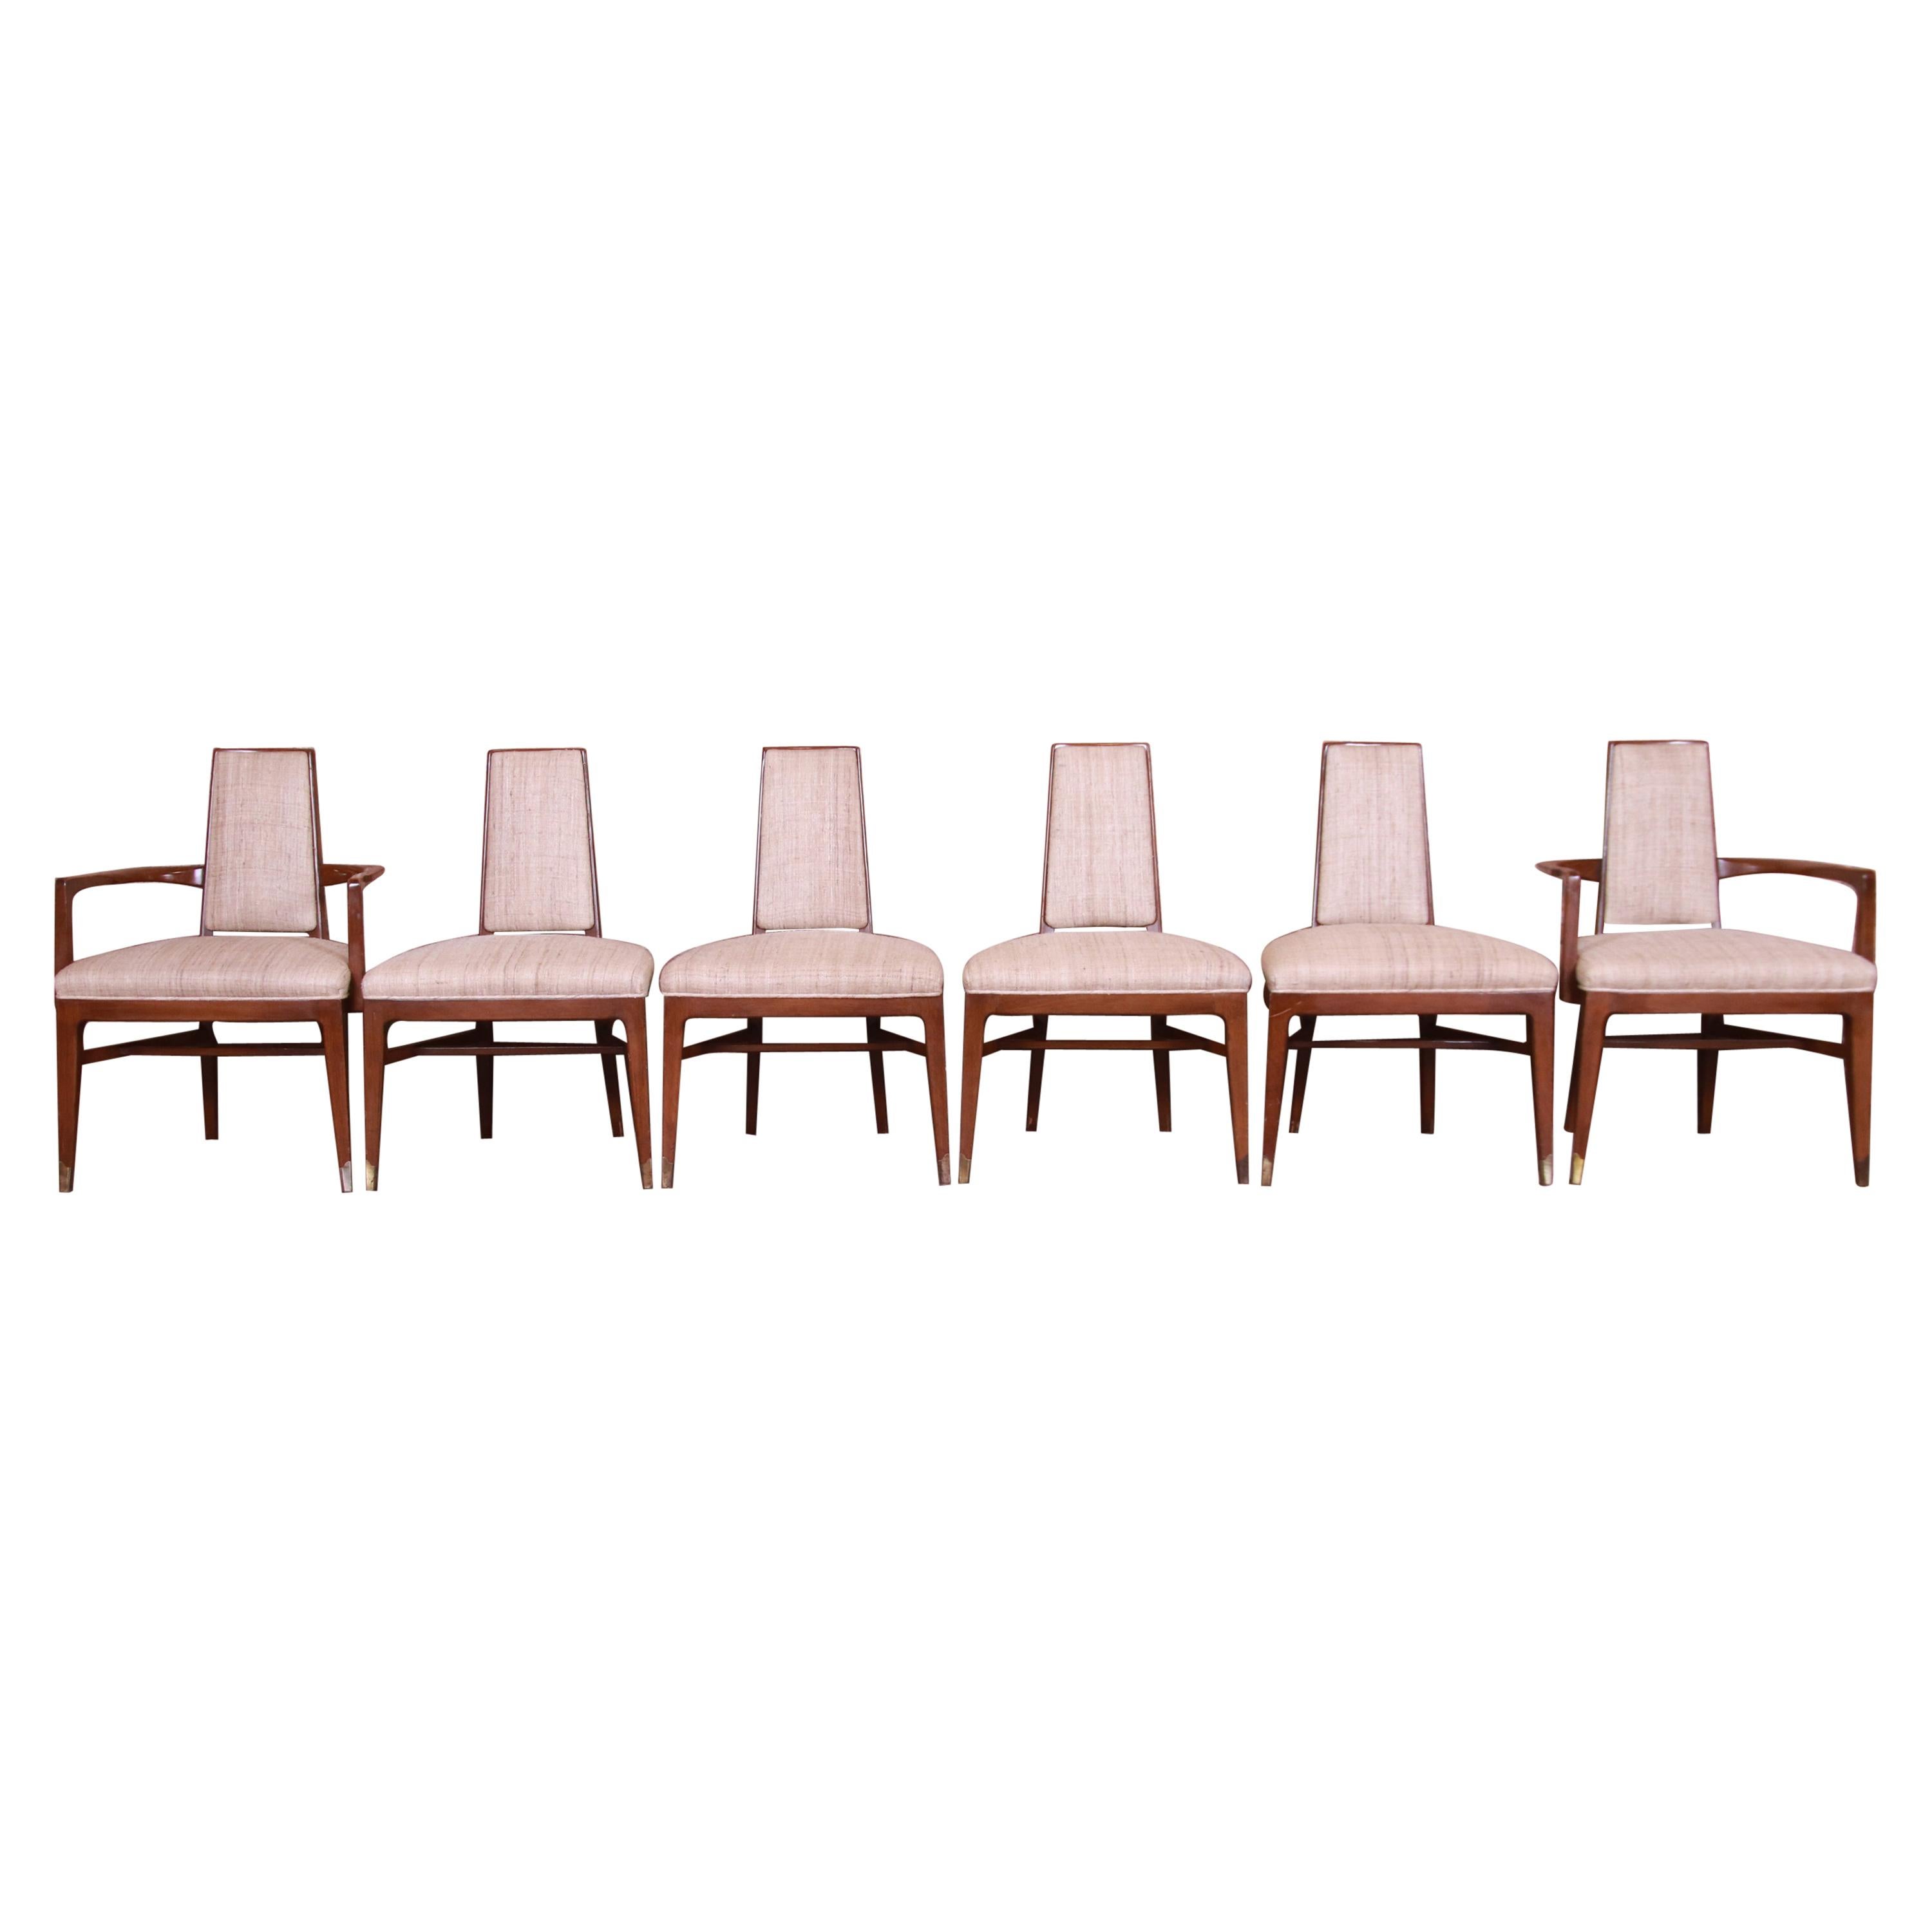 Mid-Century Modern Sculpted Walnut Dining Chairs by White Furniture, Set of Six